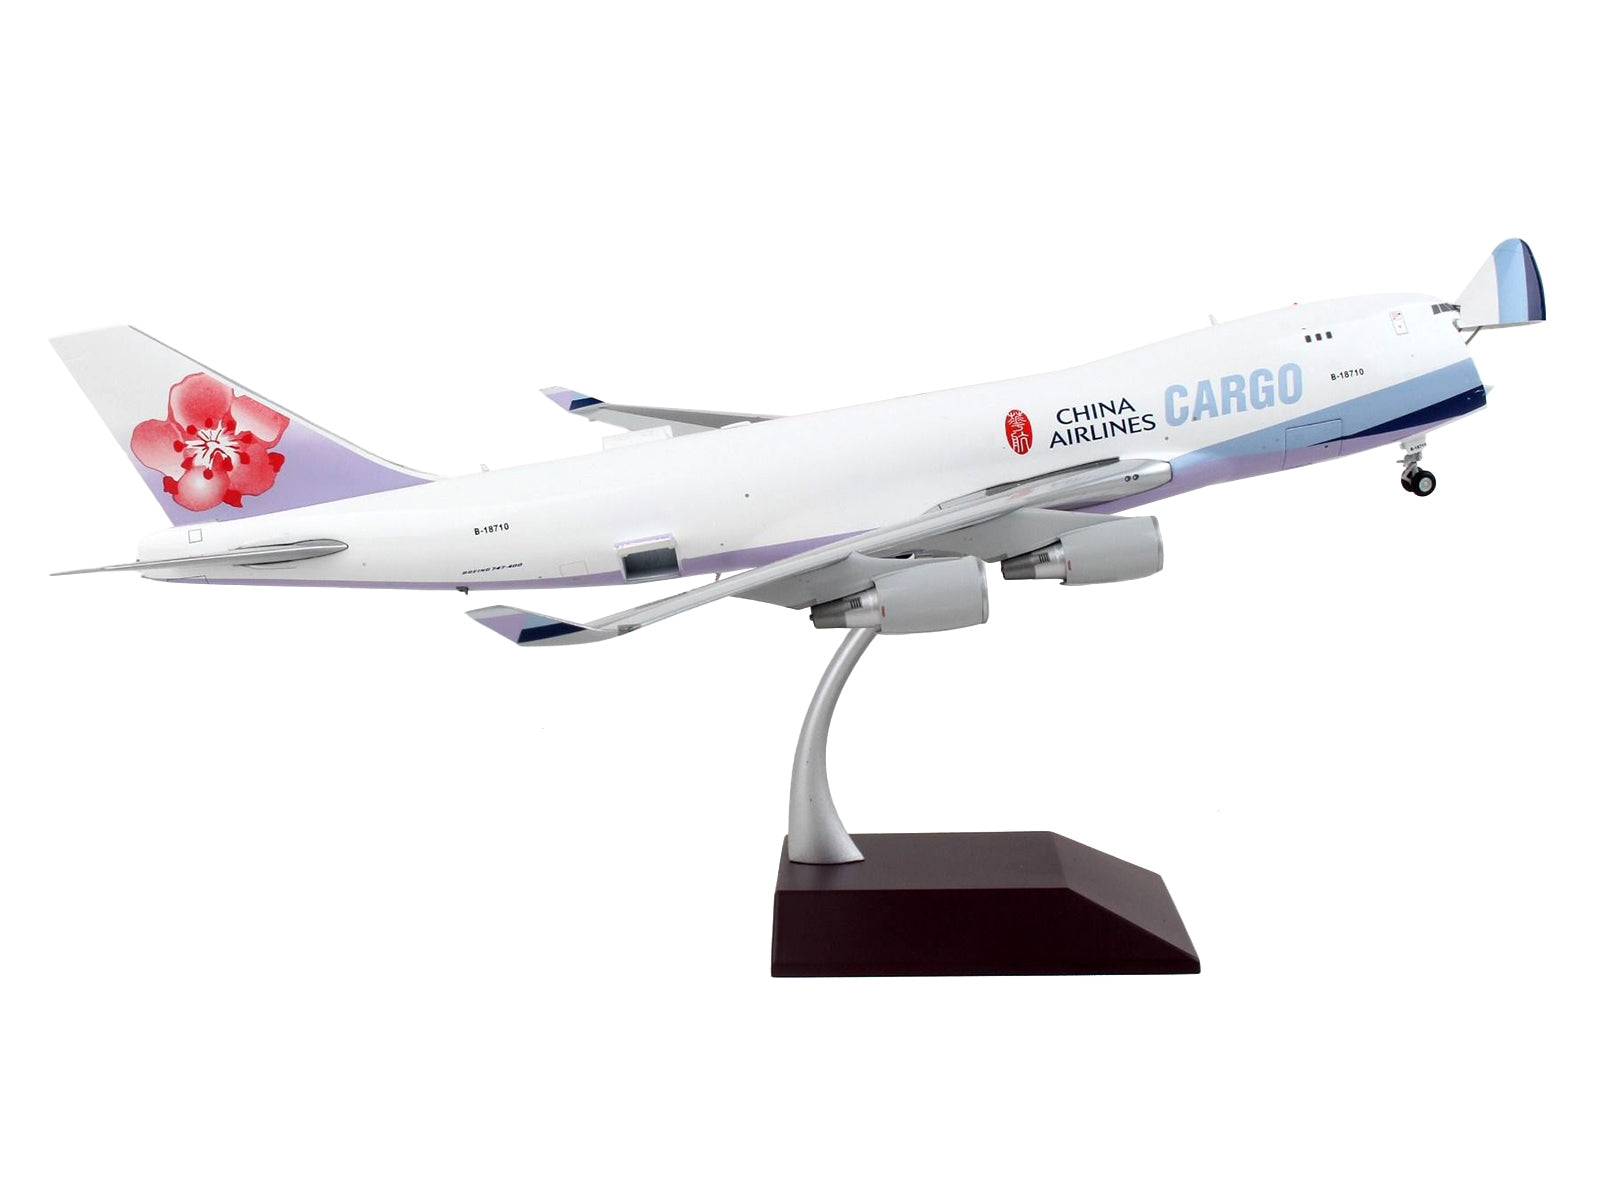 Boeing 747-400F Commercial Aircraft "China Airlines Cargo" White with Purple Tail